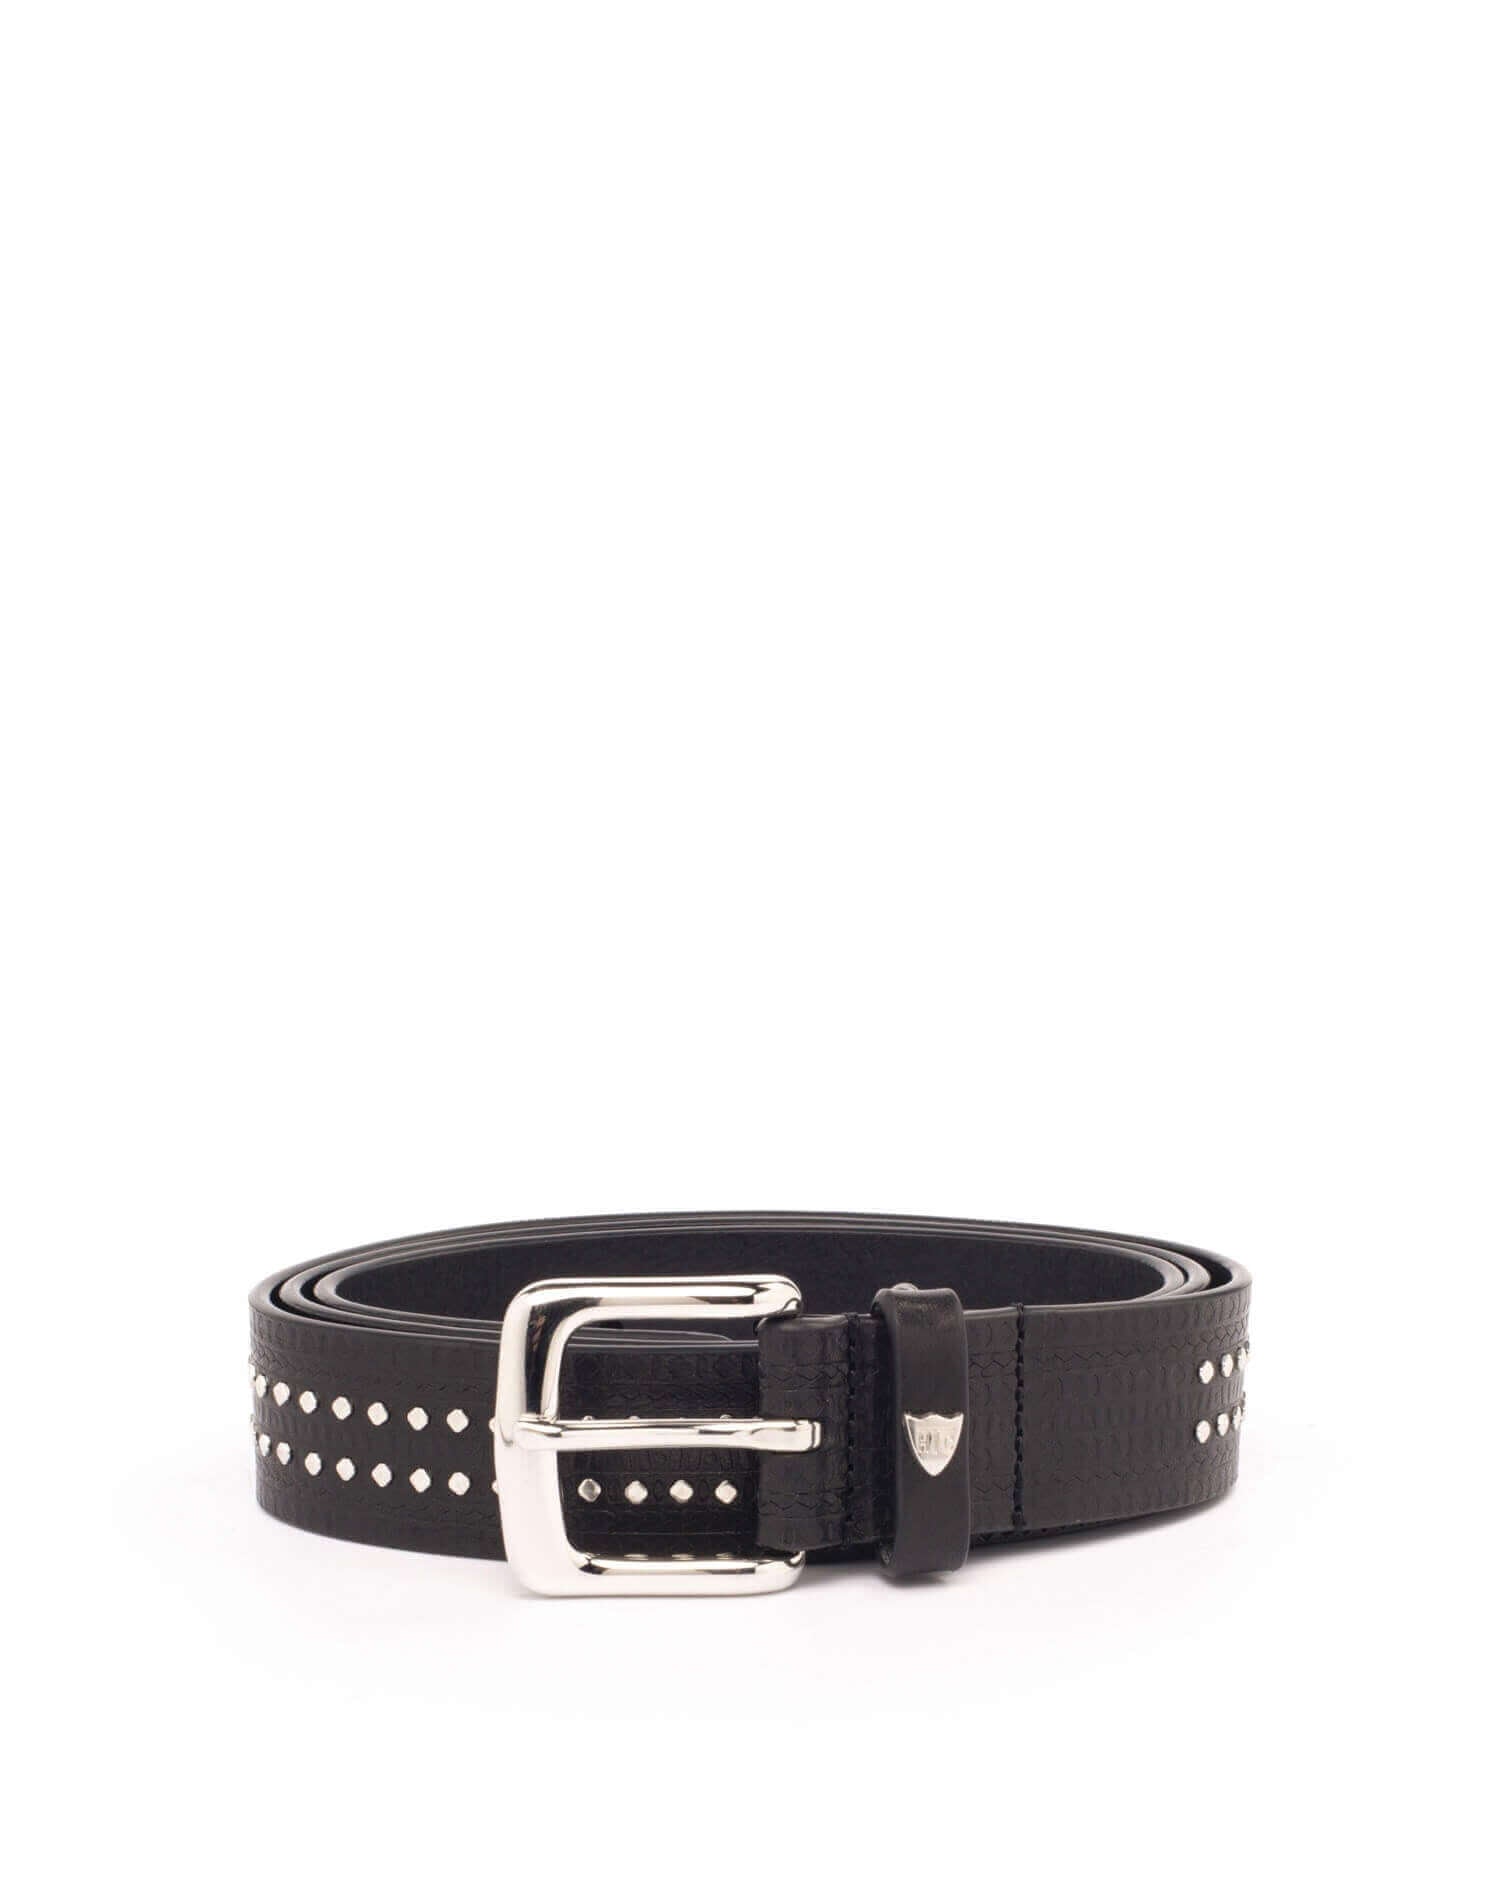 DEVO BELT Black leather belt with studs, brass buckle, studded zamac belt loop and rivet with HTC logo. Height: 3 cm. Made in Italy. HTC LOS ANGELES